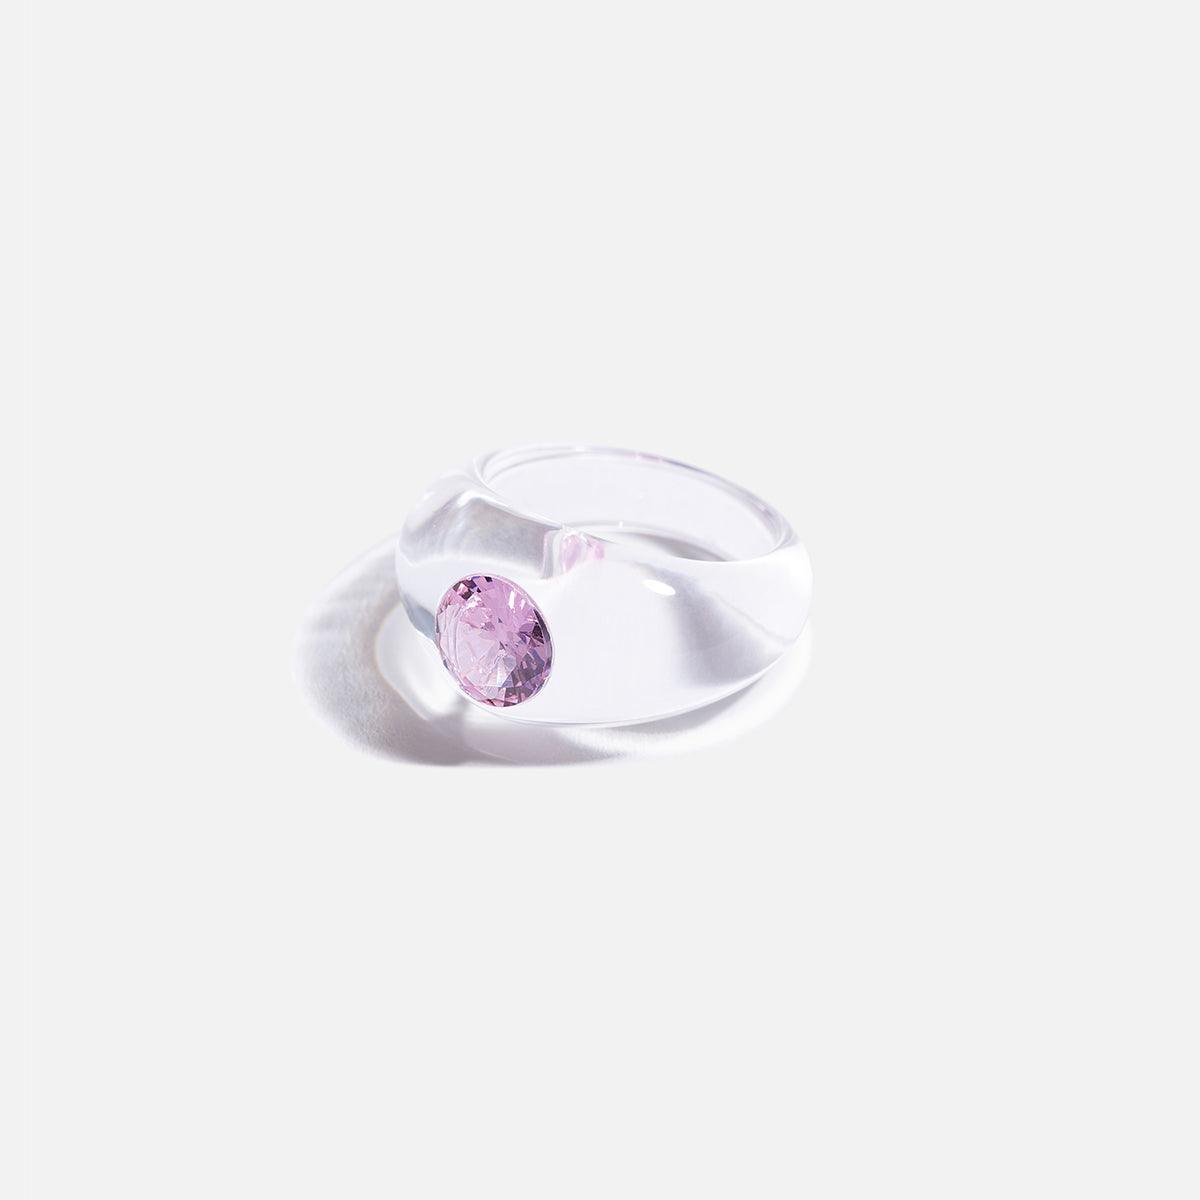 Sarah Noor Astro Ring, Pink - At Present Jewelry